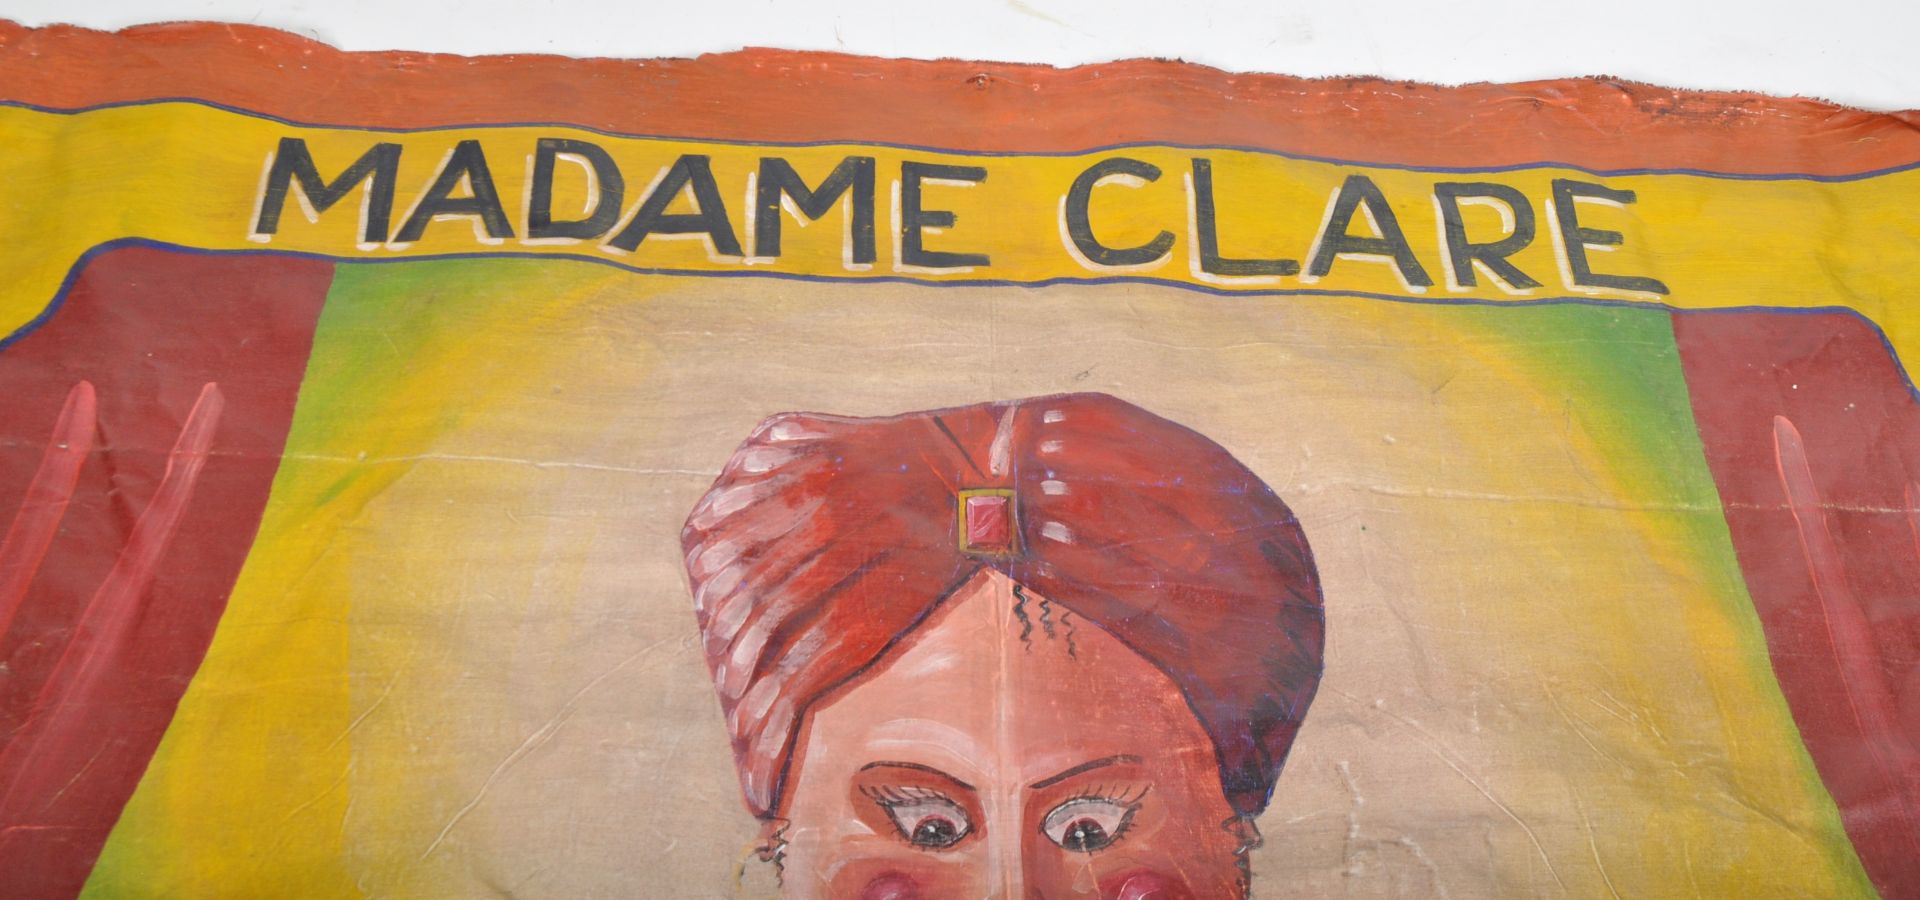 MADAME CLARE - VINTAGE 20TH FAIRGROUND CANVAS BANNER - Image 2 of 6